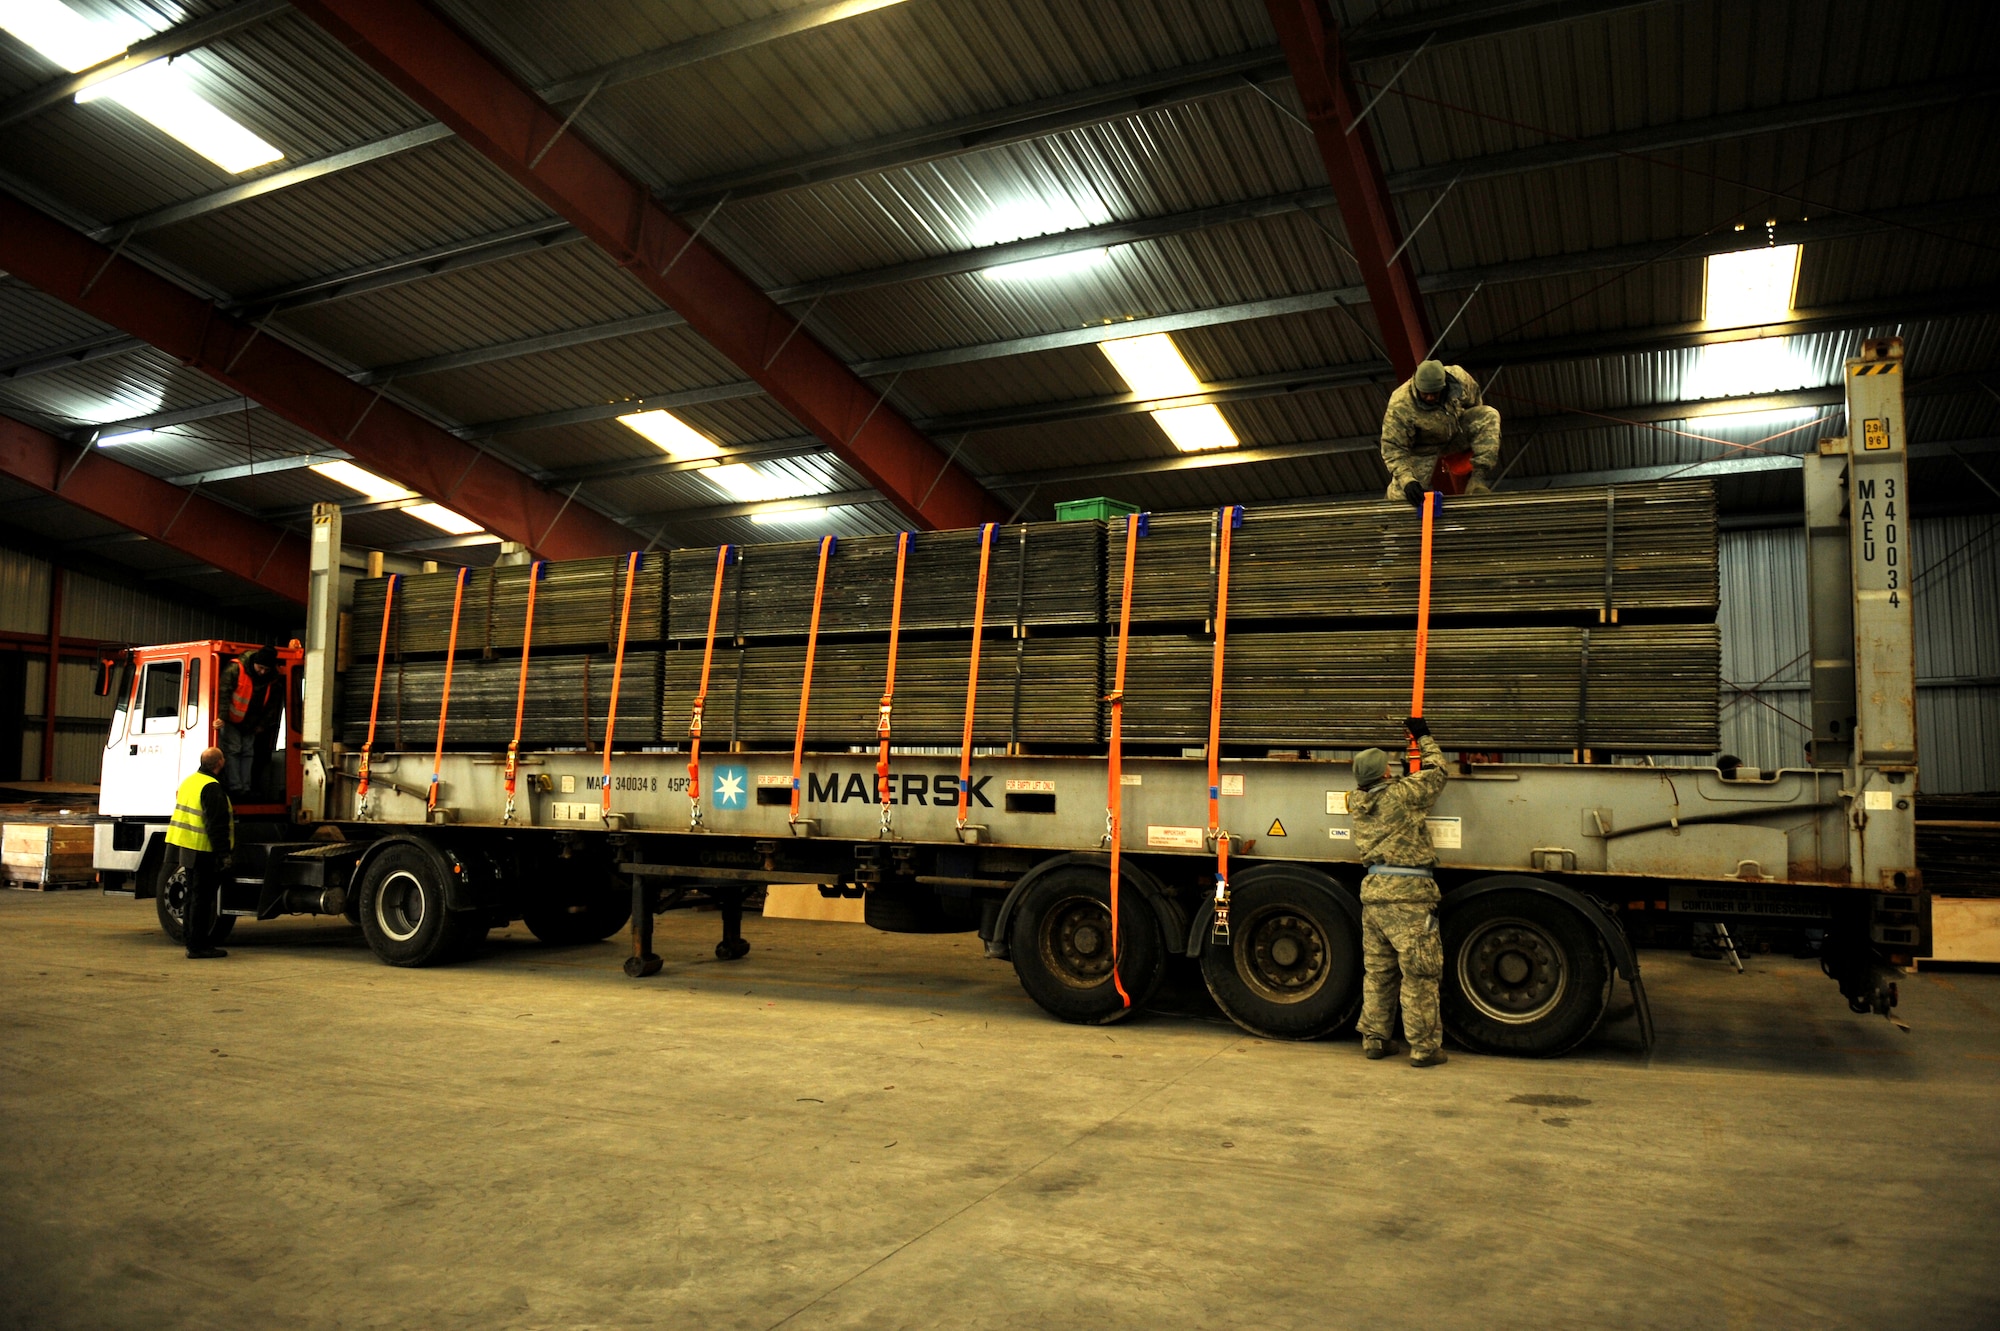 U.S. Air Force Tech. Sgt. Kimberly Blaum and Stevenson Johnson, both from the 86th Material Maintenance Squadron, Ramstein Air Base, Germany, prepares to strap down a AM-2 matt landing strip at the Central Region Storage Facility, Feb. 22, 2010, Sanem, District of Luxembourg, in support of ongoing war efforts. (U.S. Air Force photo by Tech. Sgt. Sarayuth Pinthong)